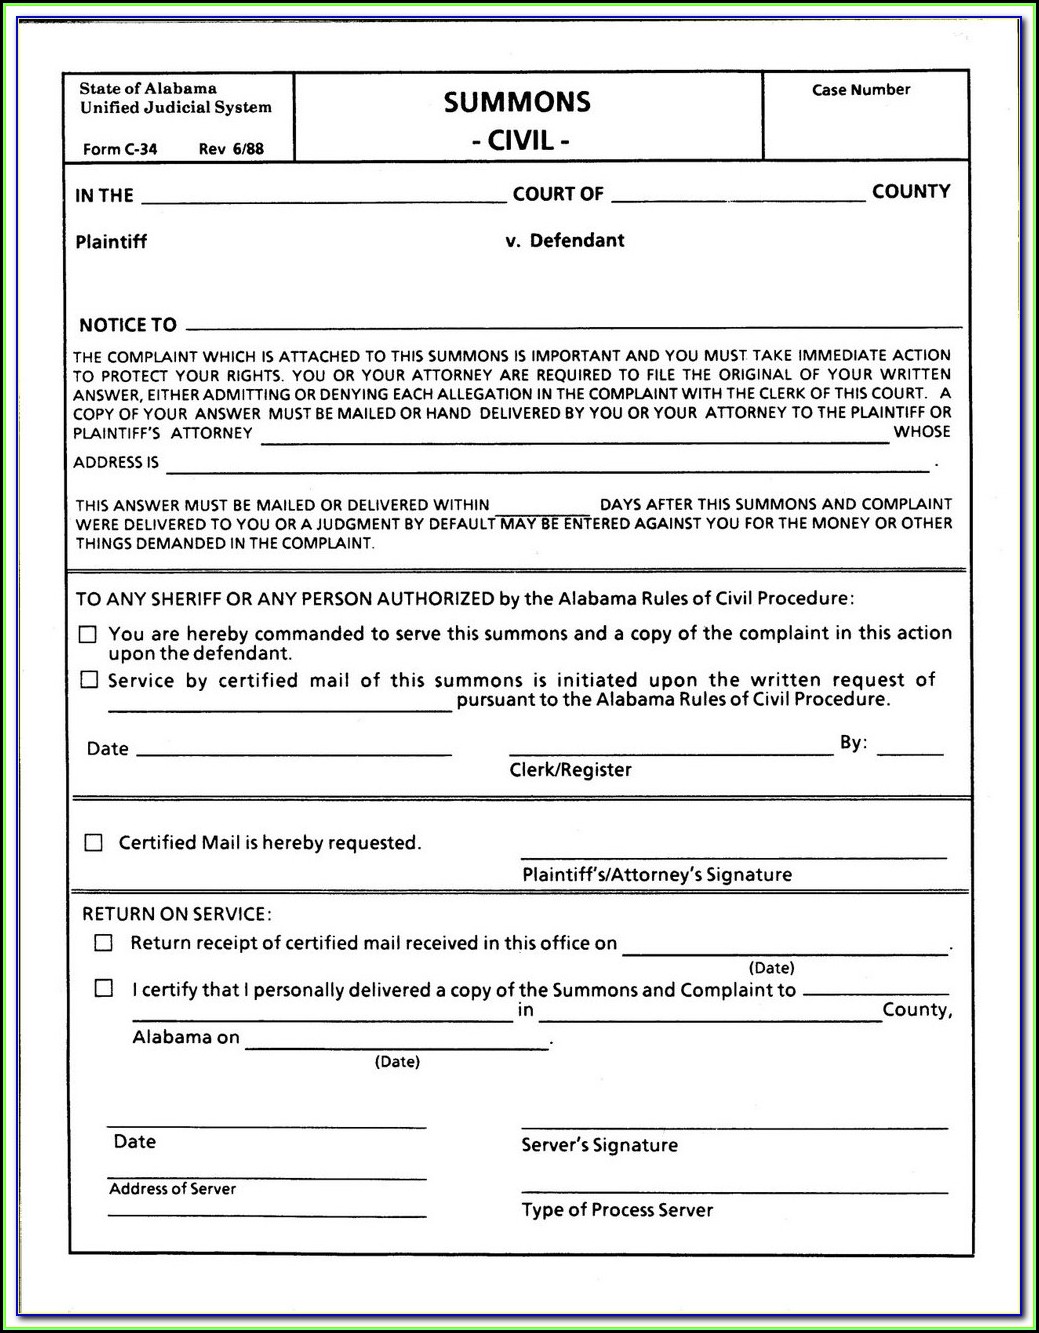 nys-diy-uncontested-divorce-forms-form-resume-examples-q78qg7mkg9